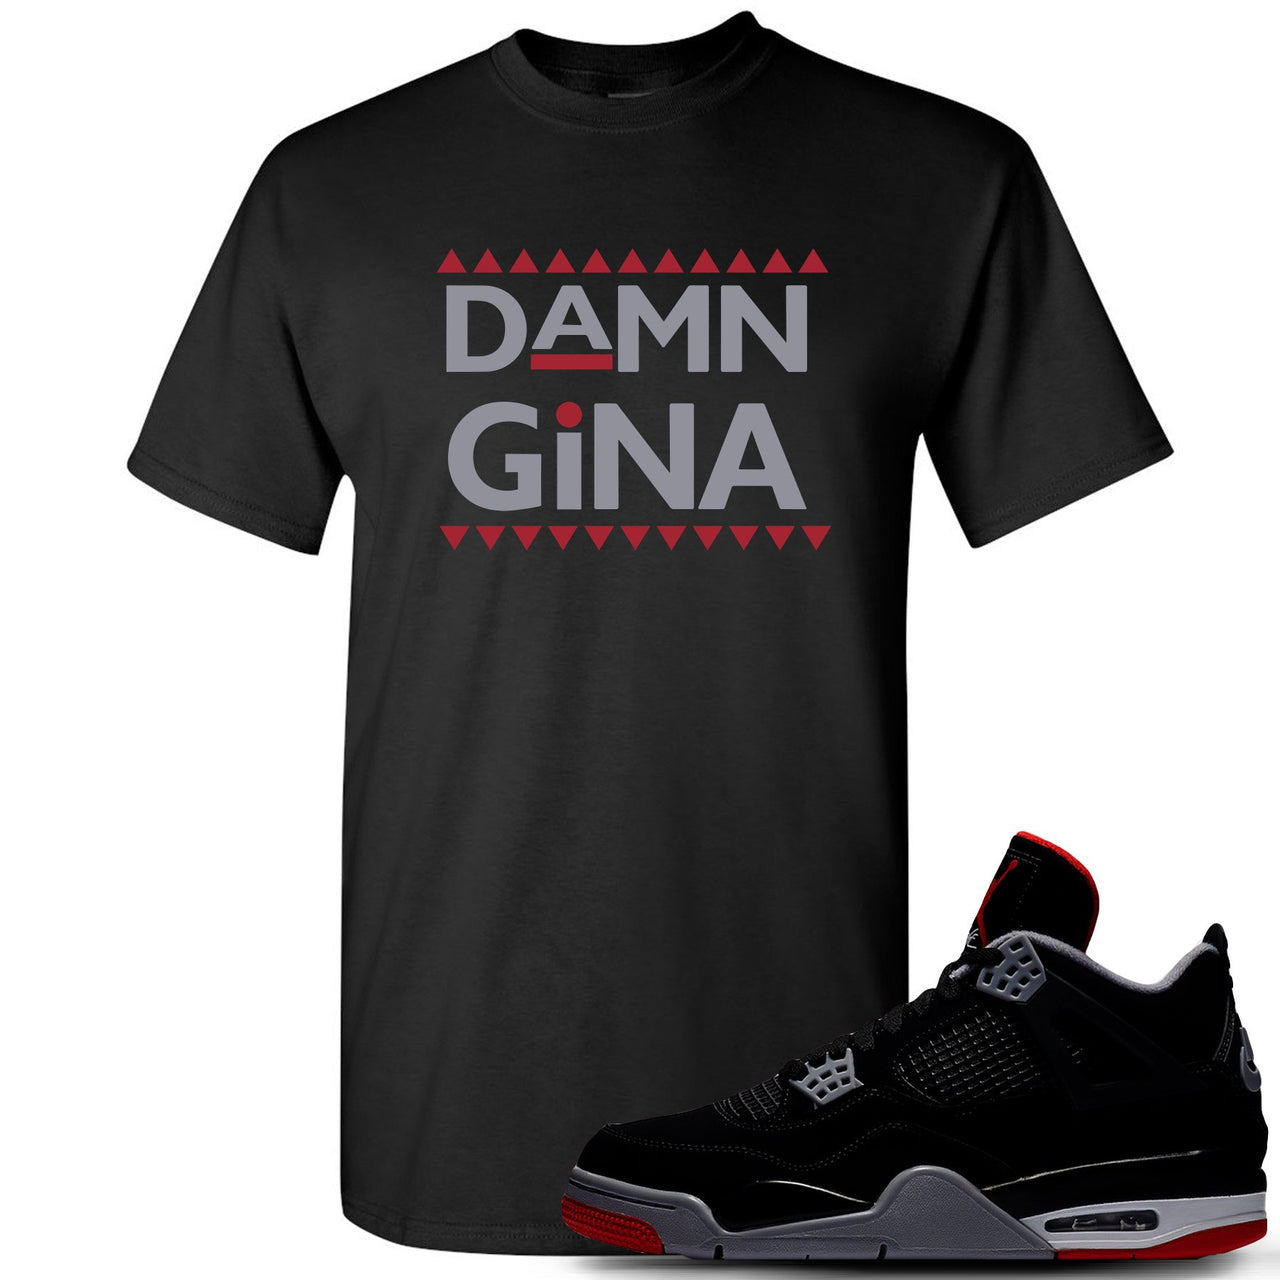 This black and grey t-shirt will match great with your Air Jordan 4 Bred shoes